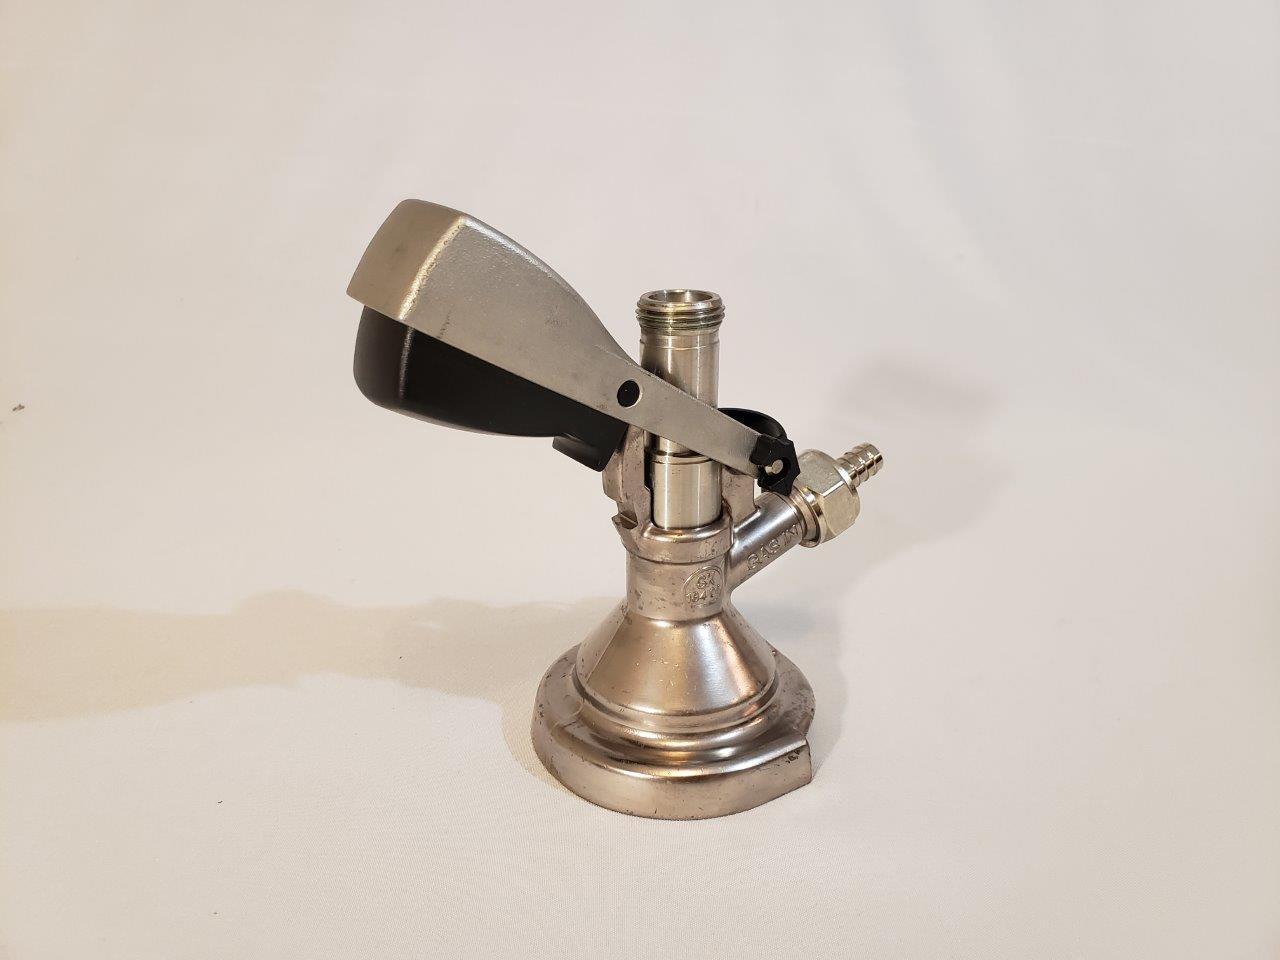 Micro Matic Keg Coupler Tap With Ergo Lever Handle Sk184.04 DH1501 a System for sale online 